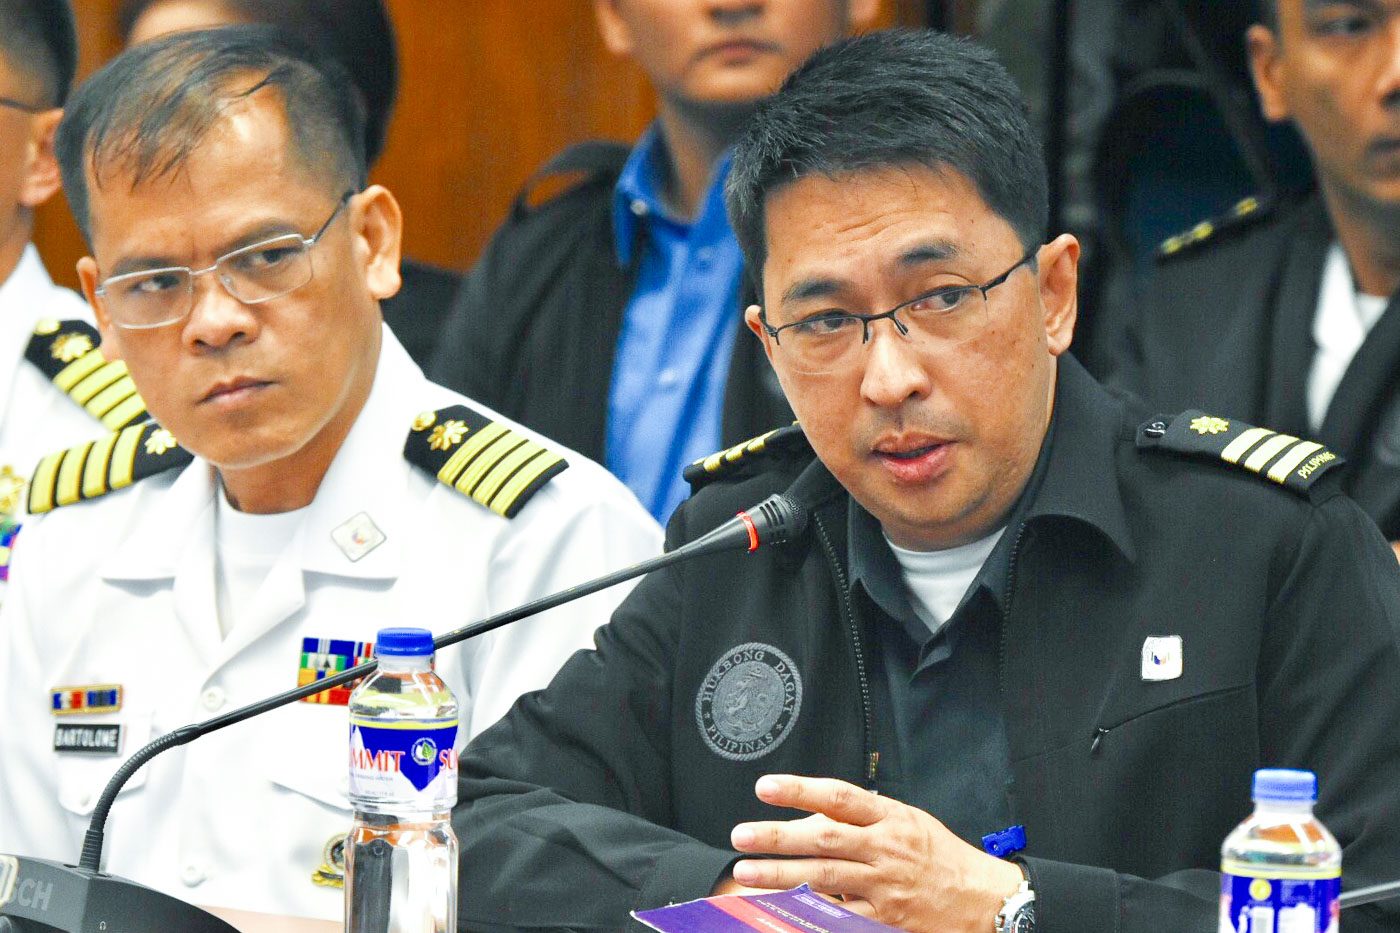 ORIGINAL SIN? Commodore Sergio Bartolome and Major Marlon Dayao discuss how a provision supposedly disadvantageous to the Philippine Navy was inserted in the contract. Photo by Angie de Silva/Rappler  